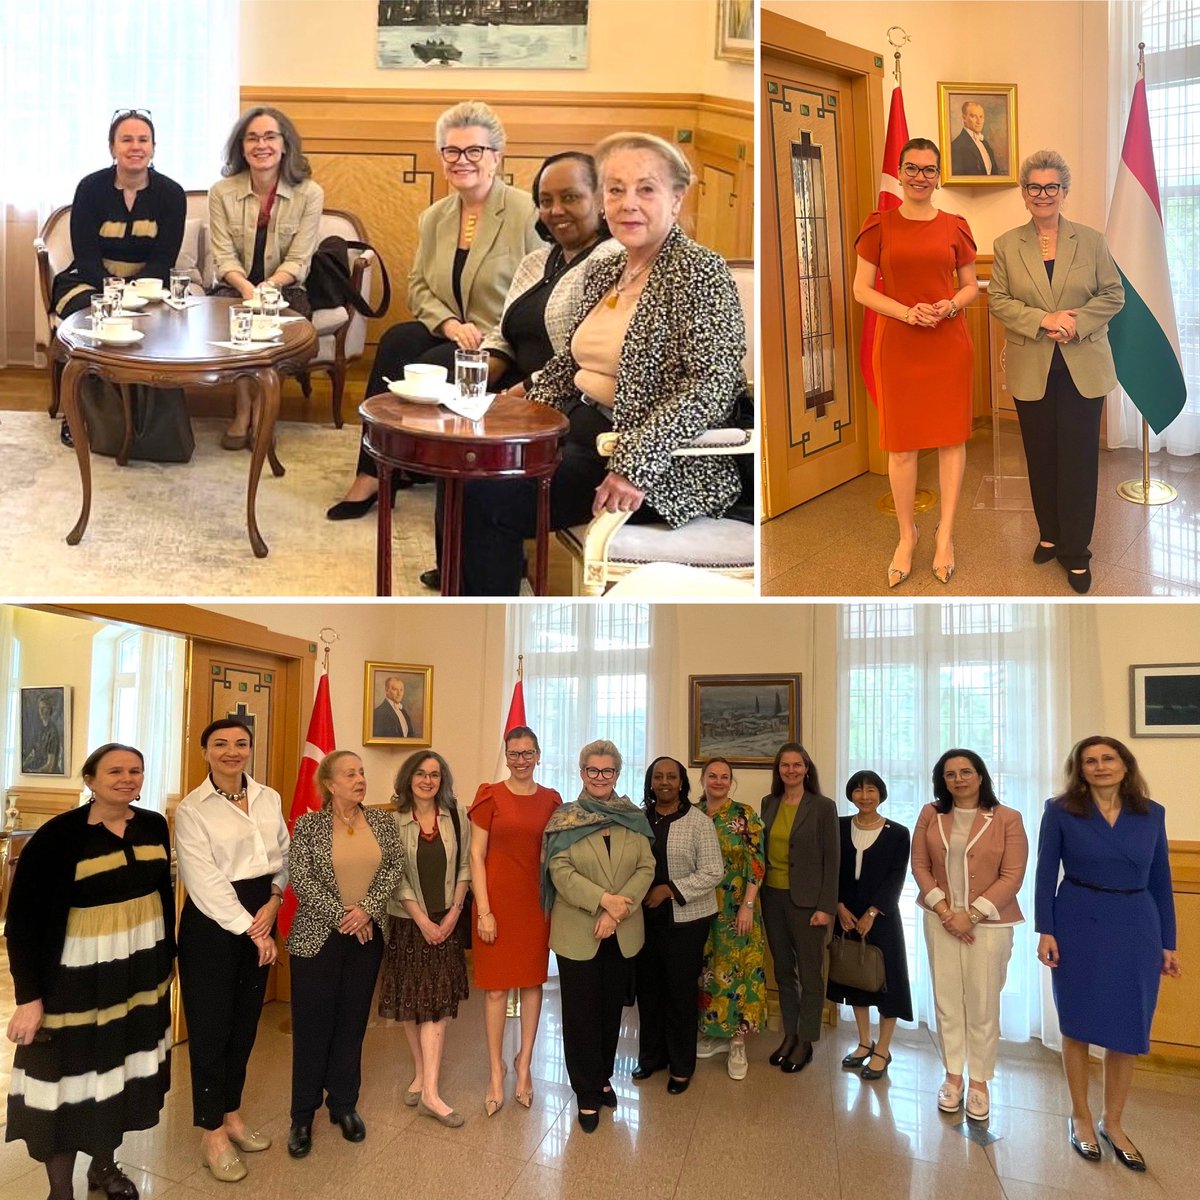 Started the week with a brilliant gathering for women ambassadors accredited to Hungary to discuss our joint programmes on Soft Power Diplomacy, Women4Diplomacy and Women4Peace ! Thank you for hosting us @GulsenKaranis Ambassador of Türkiye! 🇹🇷 🇫🇷 🇧🇷 🇱🇧 🇲🇦 🇲🇽 🇯🇵 🇷🇼 🇬🇪 🇱🇻 🇭🇺